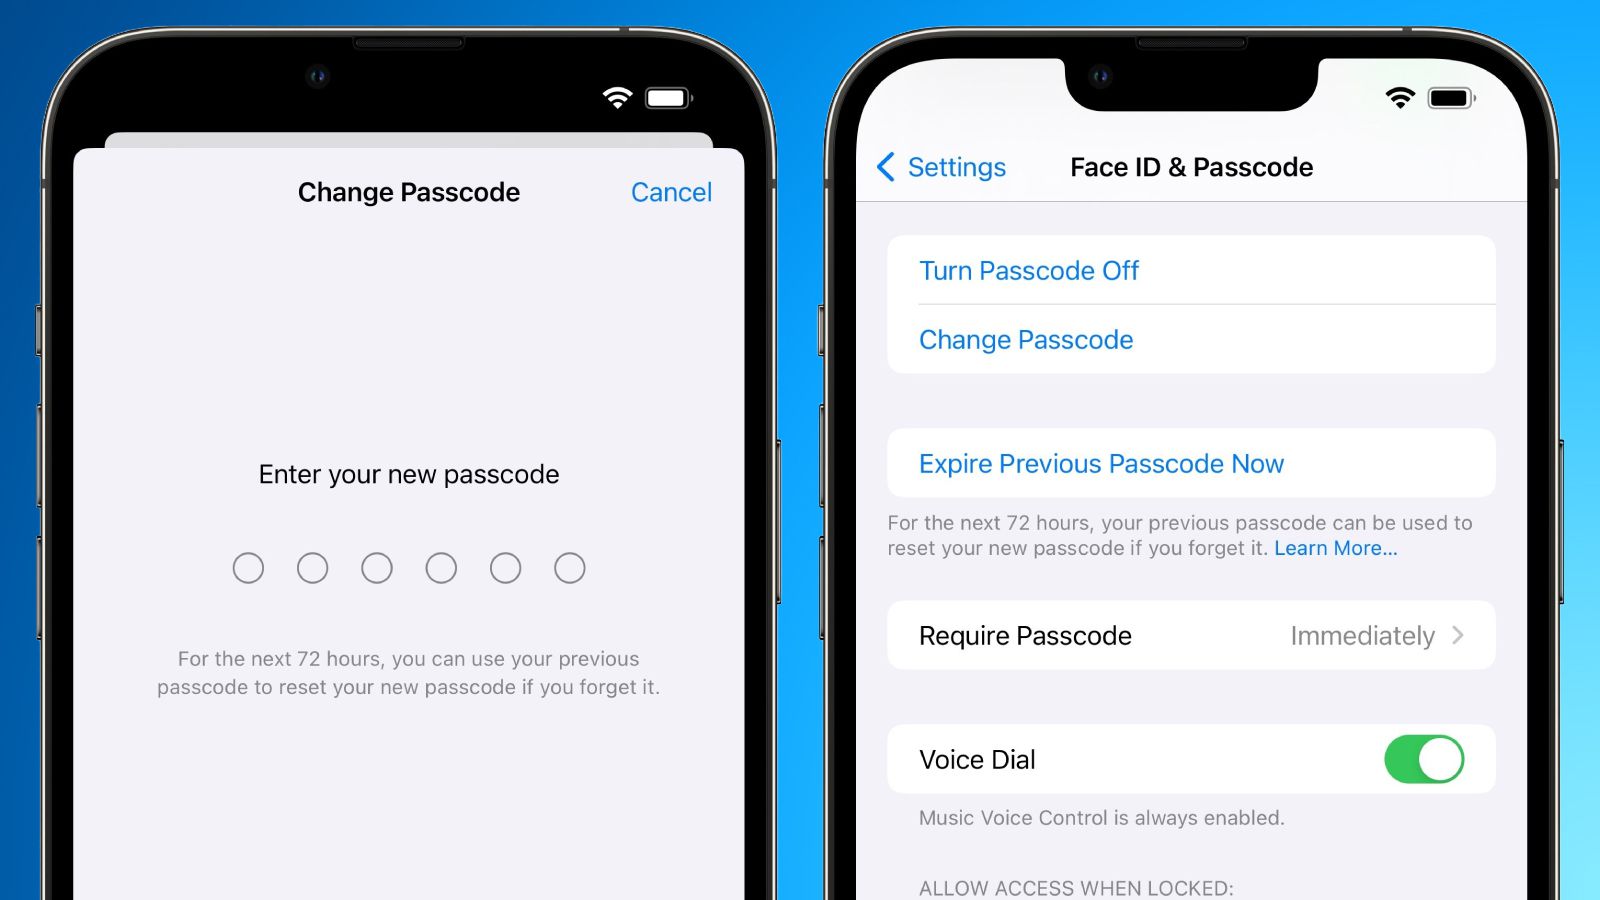 Password Woes: Resetting IPhone 10 Without Password